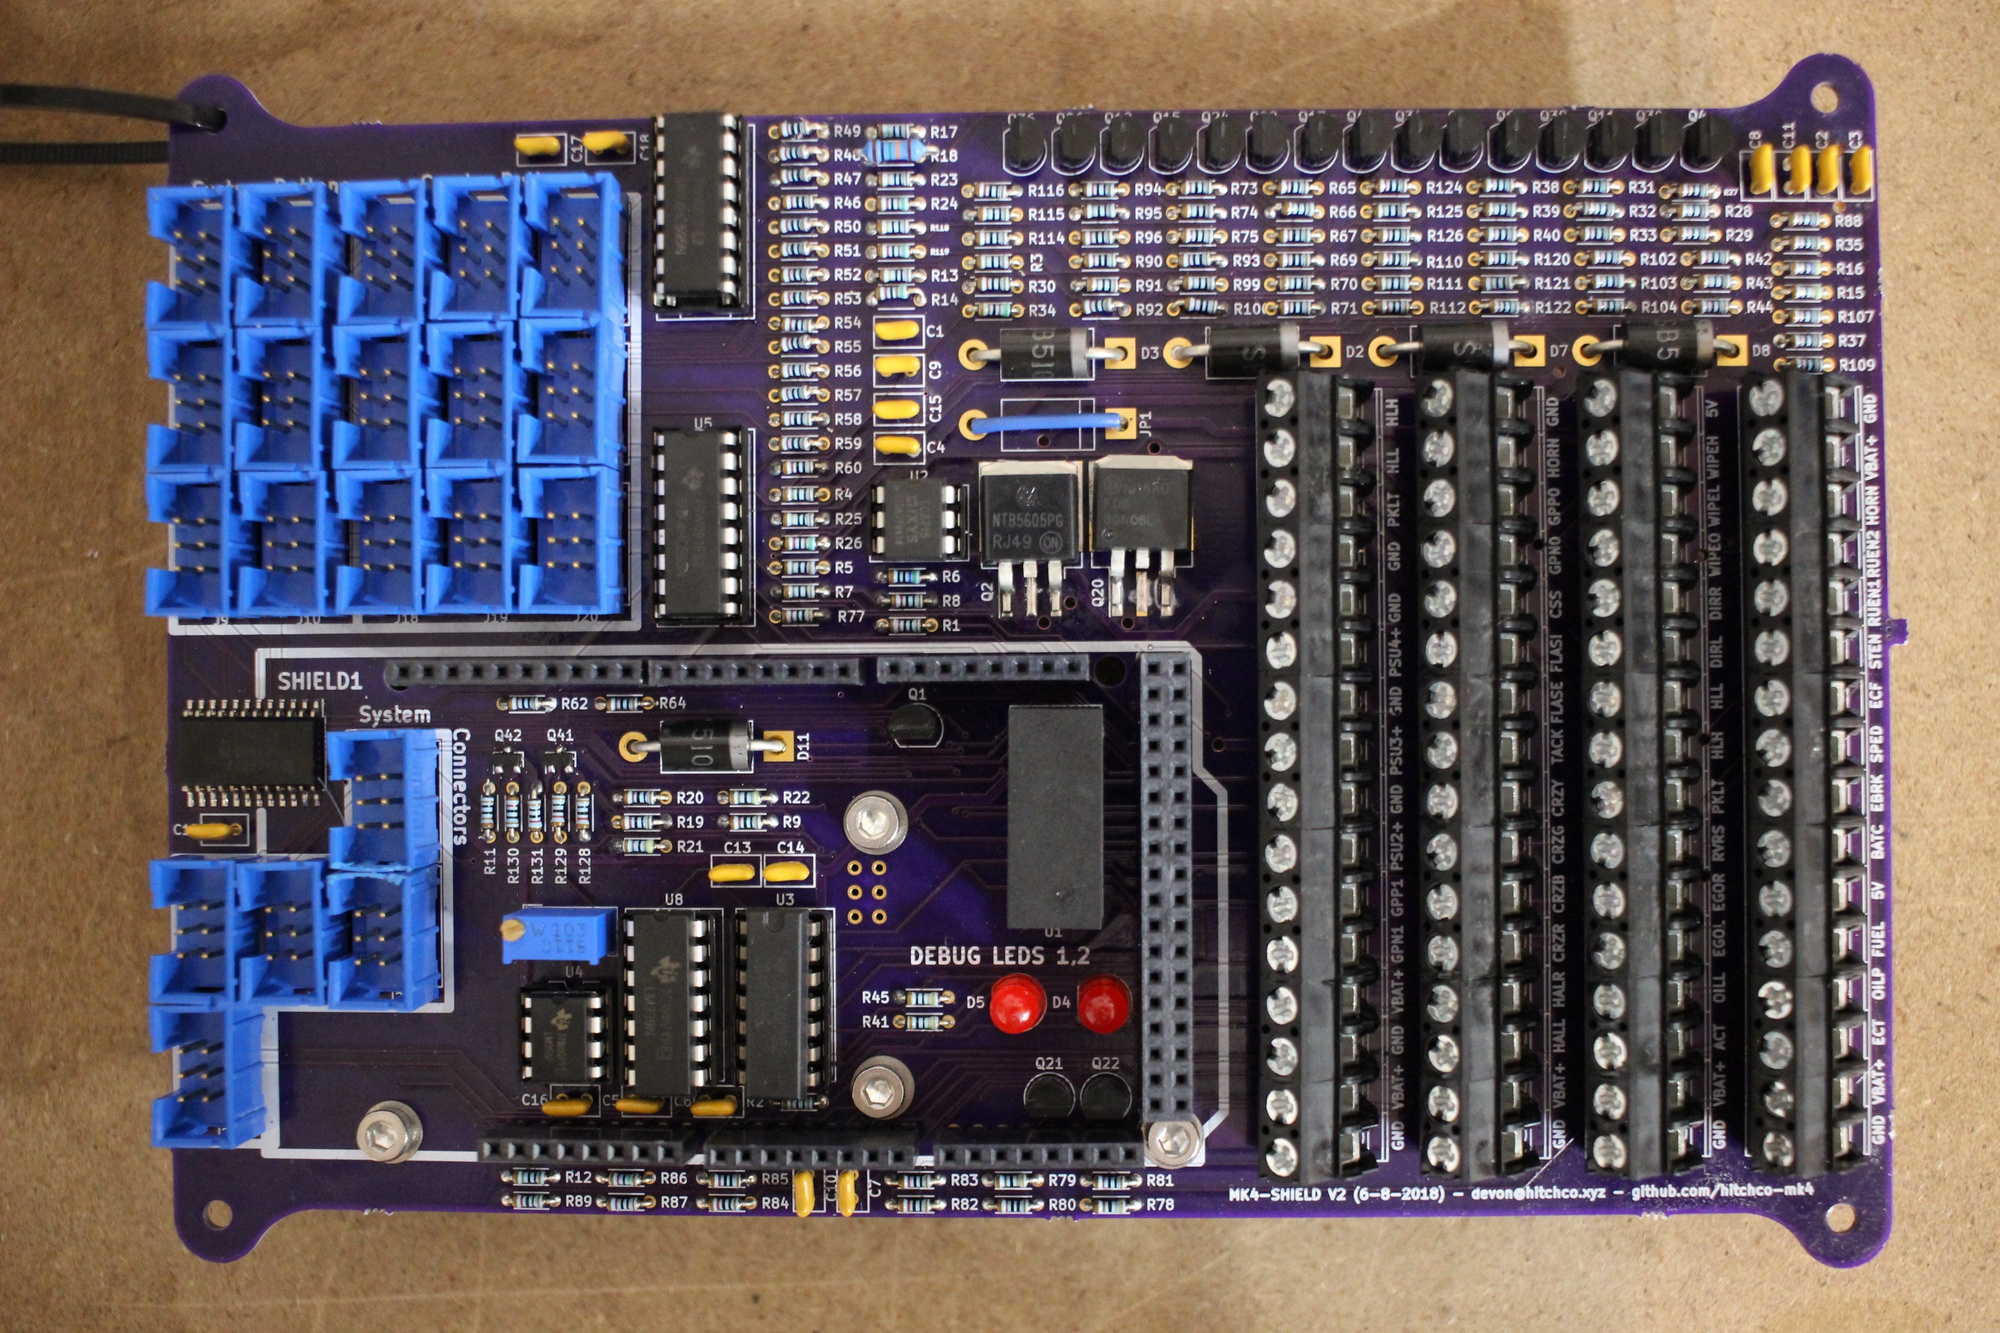 <p>Assembled PCB, no SMD resistors allowed, had to use Arduino Mega as replaceable realtime controller.</p>